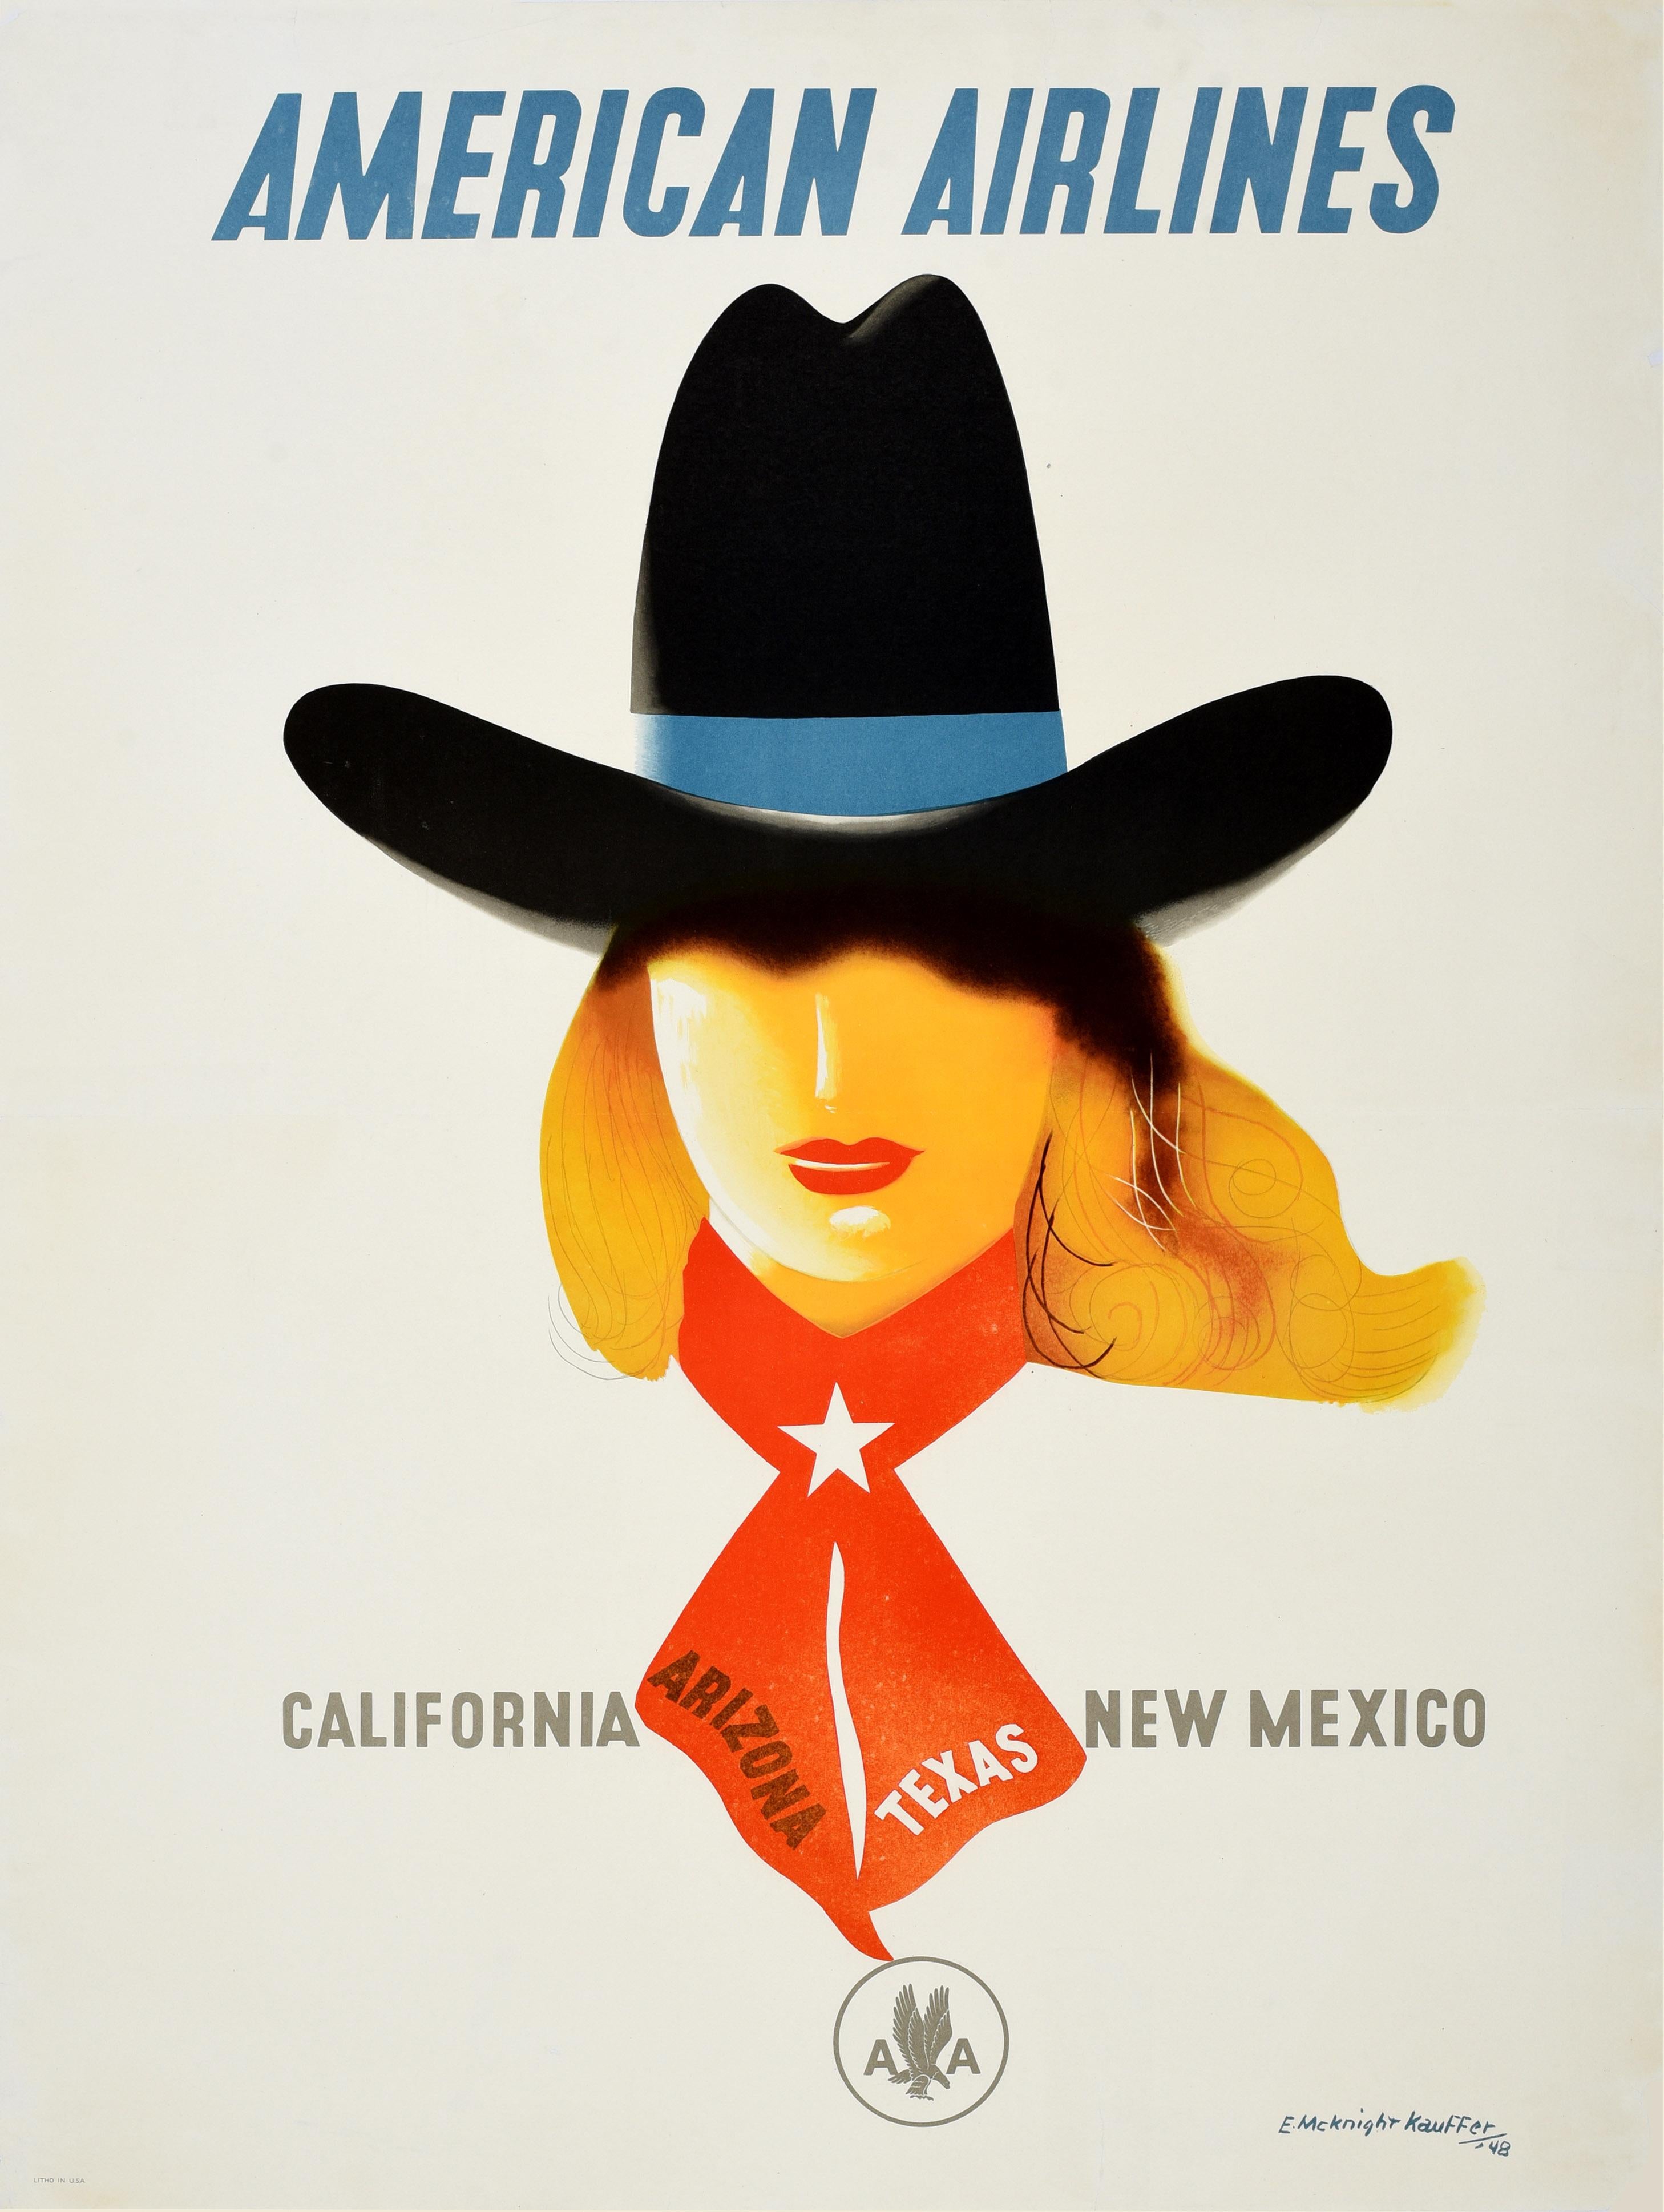 Edward McKnight Kauffer Print - Original Vintage Travel Poster American Airlines California New Mexico Cowgirl